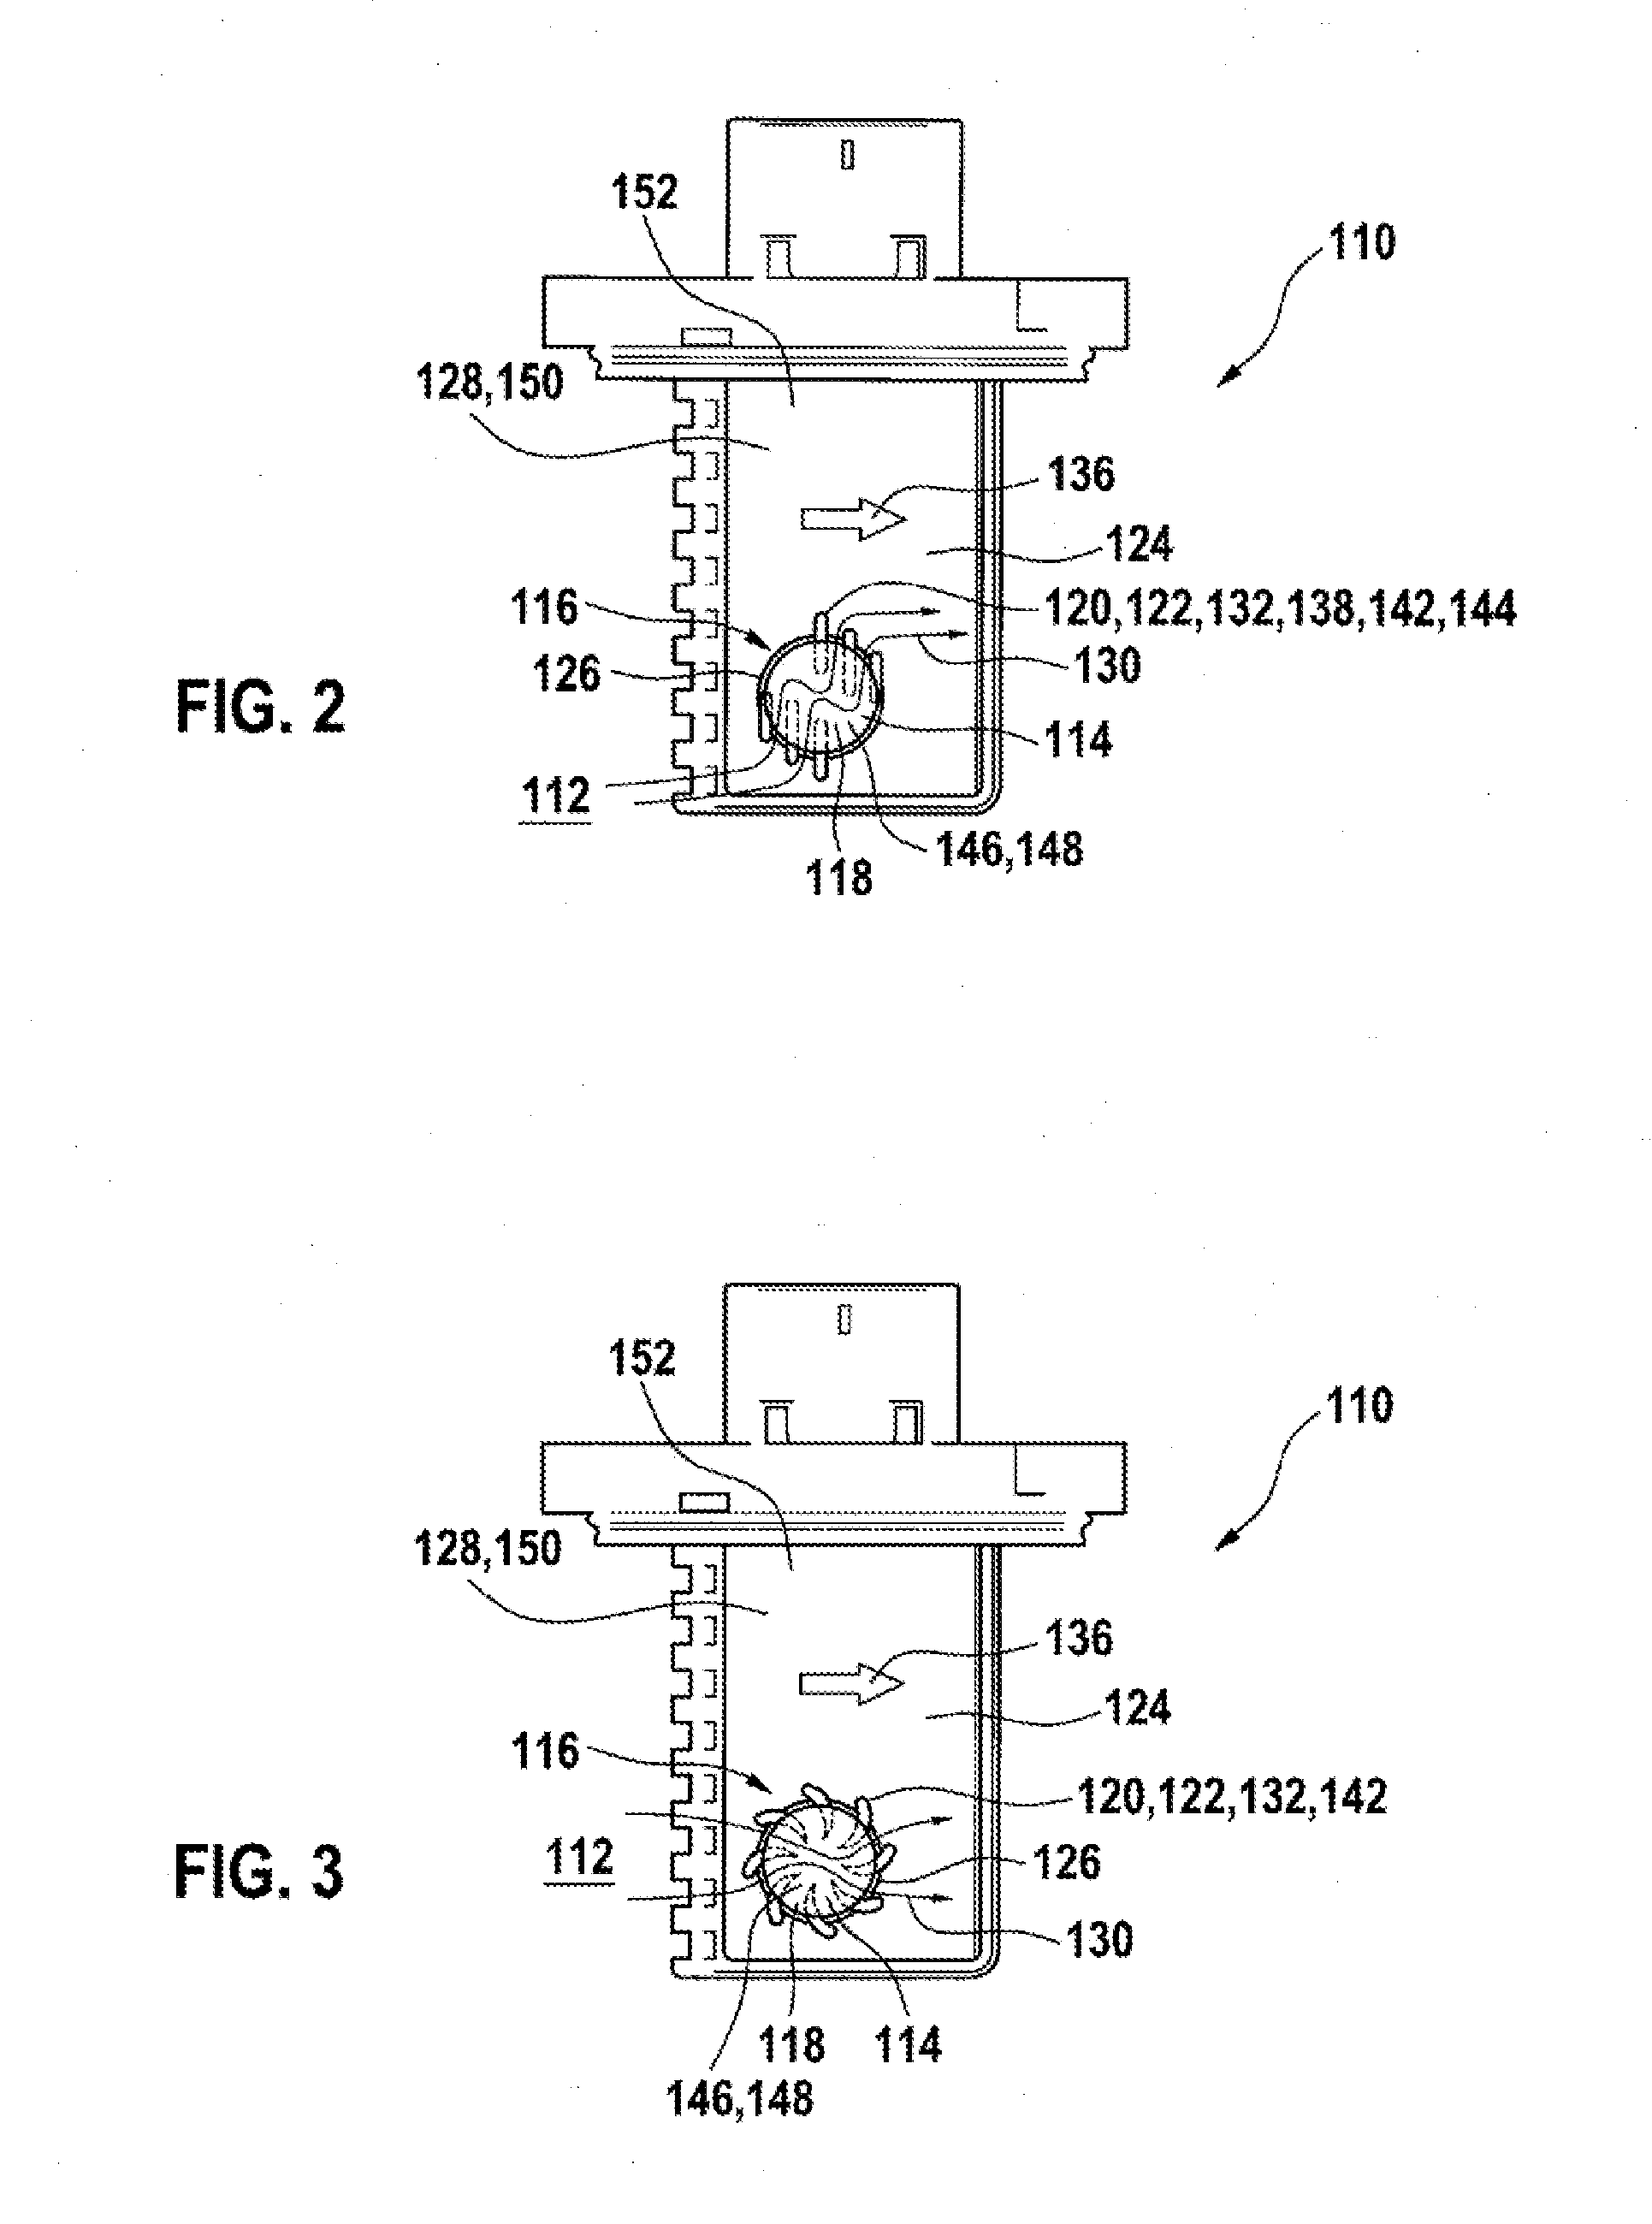 Sensor device for detecting at least the moisture of a flowing fluid medium